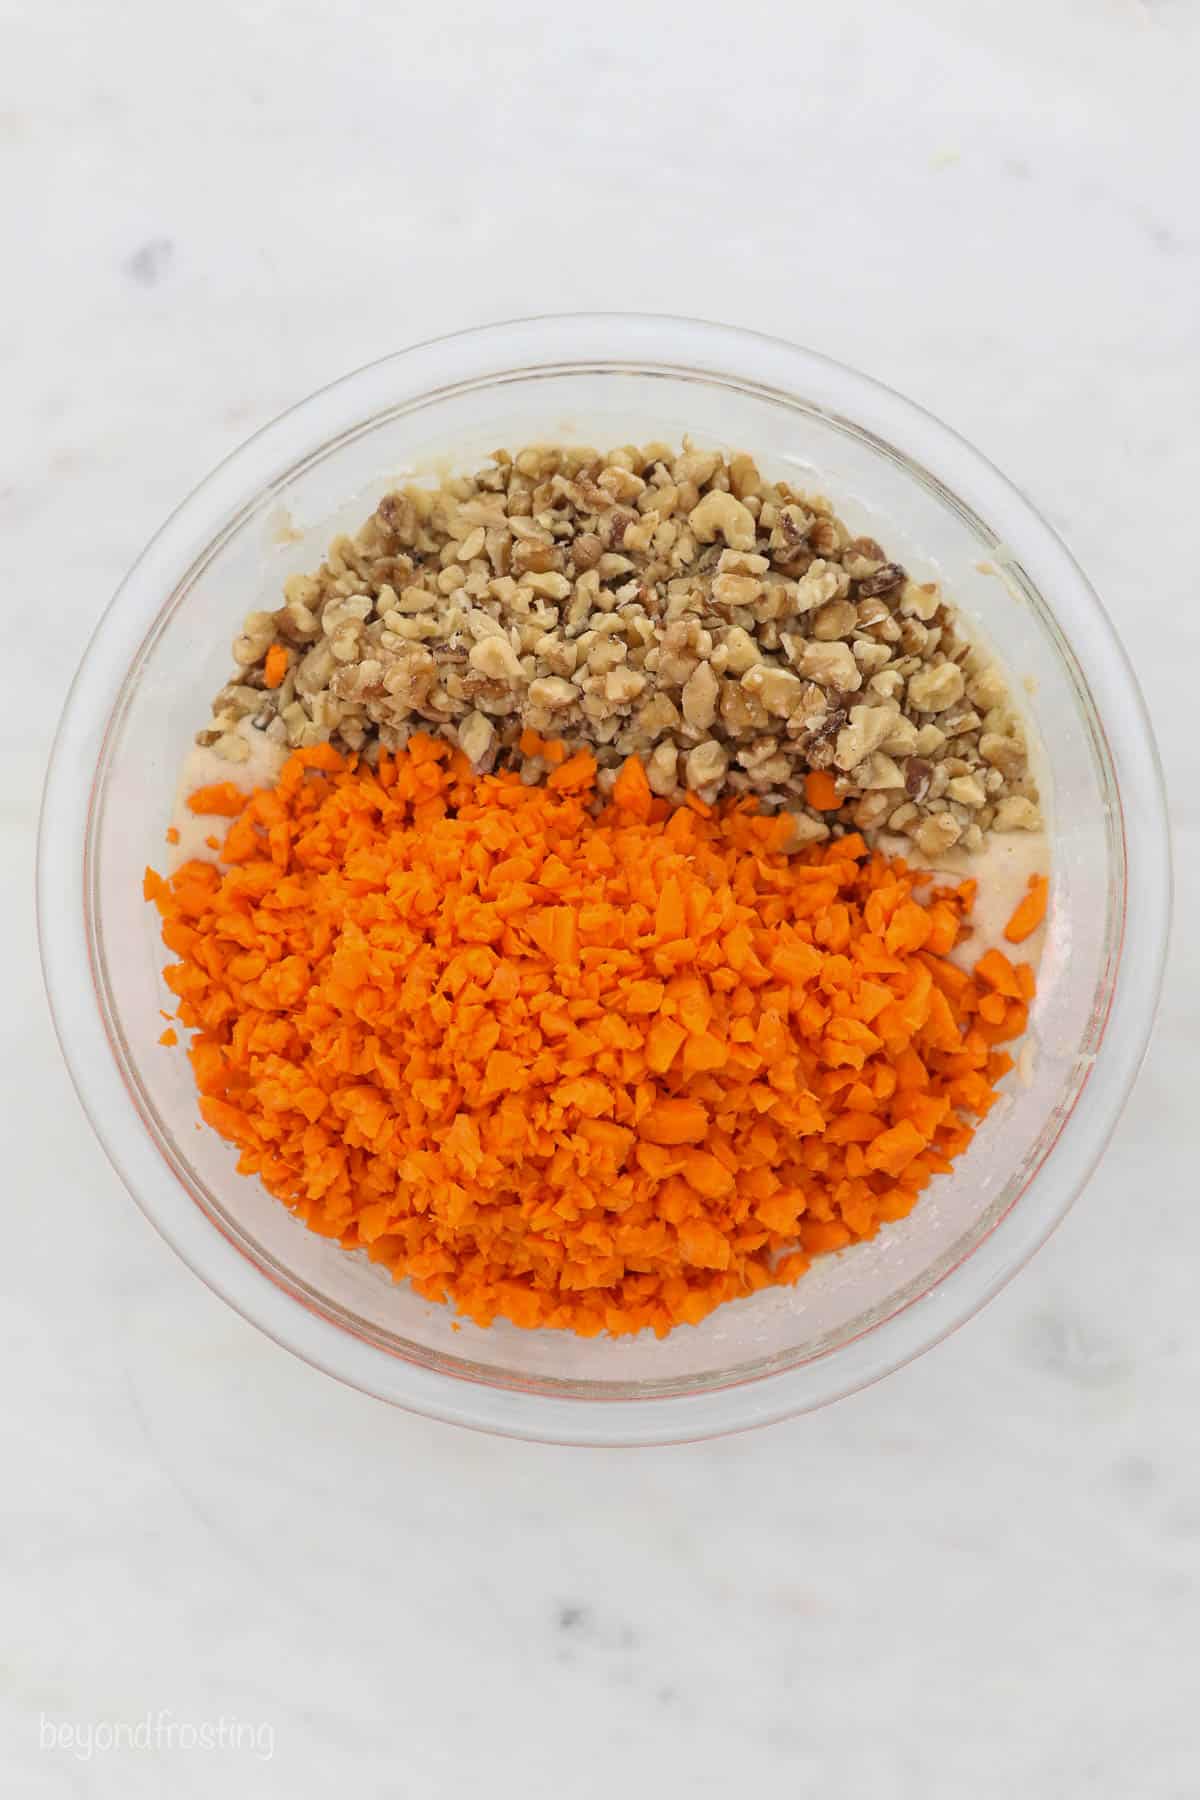 A glass mixing bowl with carrot cake batter, chopped carrots and walnuts